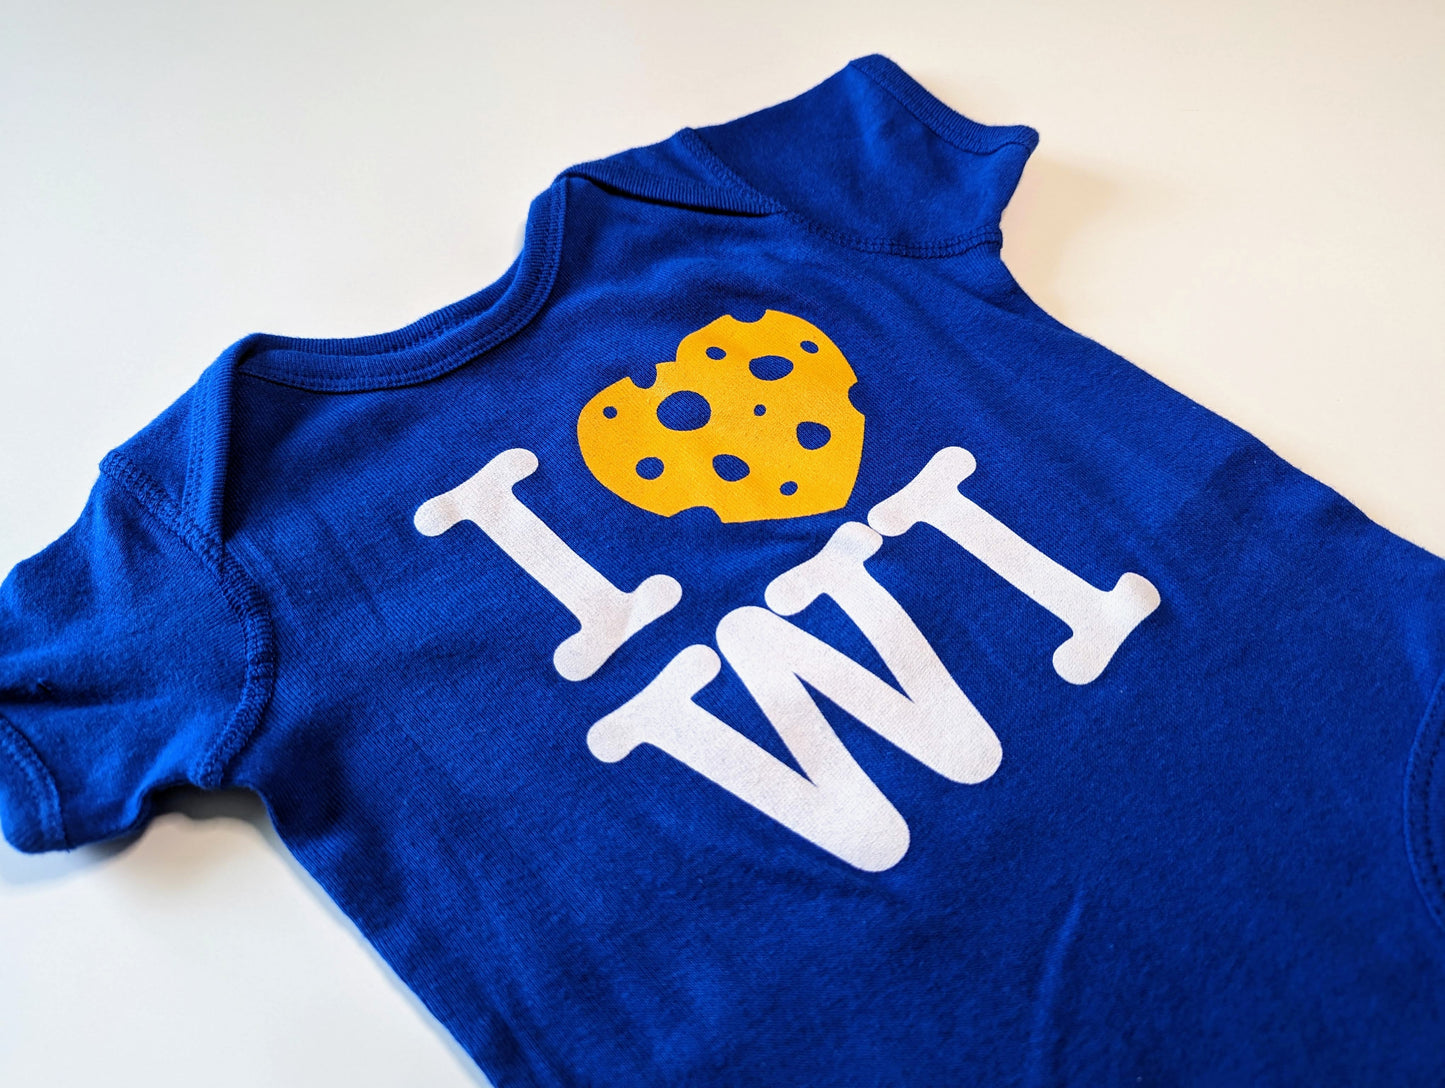 I Love Wisconsin (Cheese) - WI Travel for Babies Screen Printed Onesie Body Suit